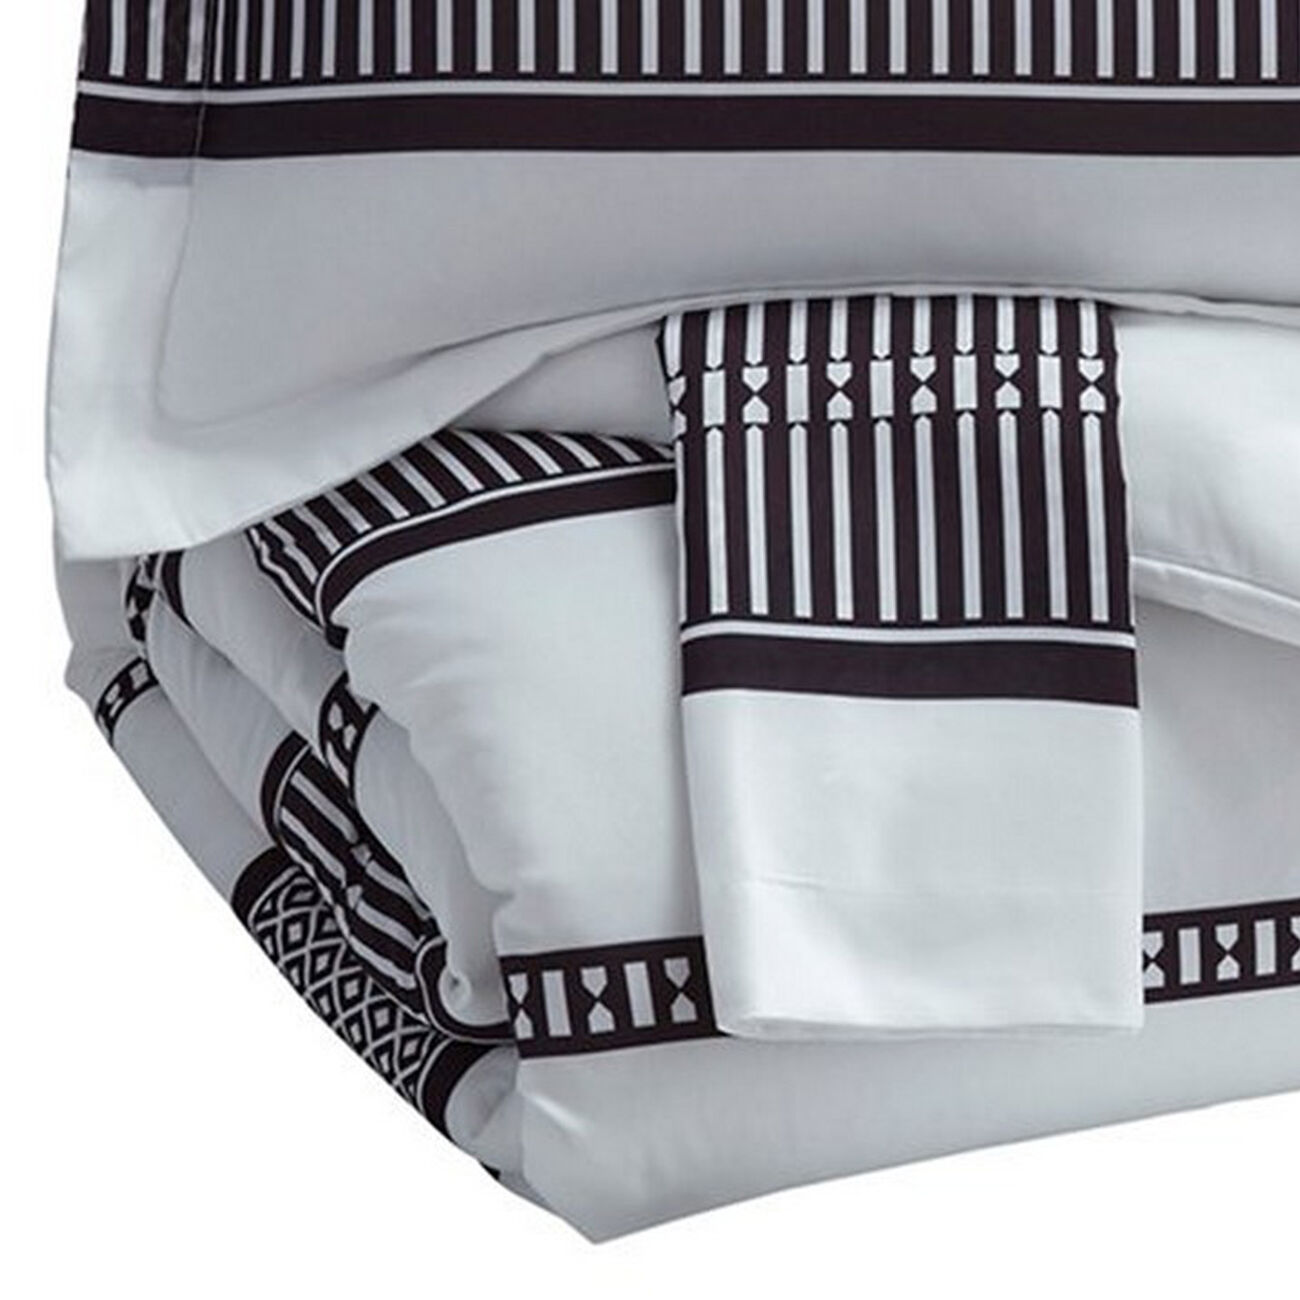 Fabric Upholstered Tribal Stripe 3 Piece King Comforter Set,Black and White